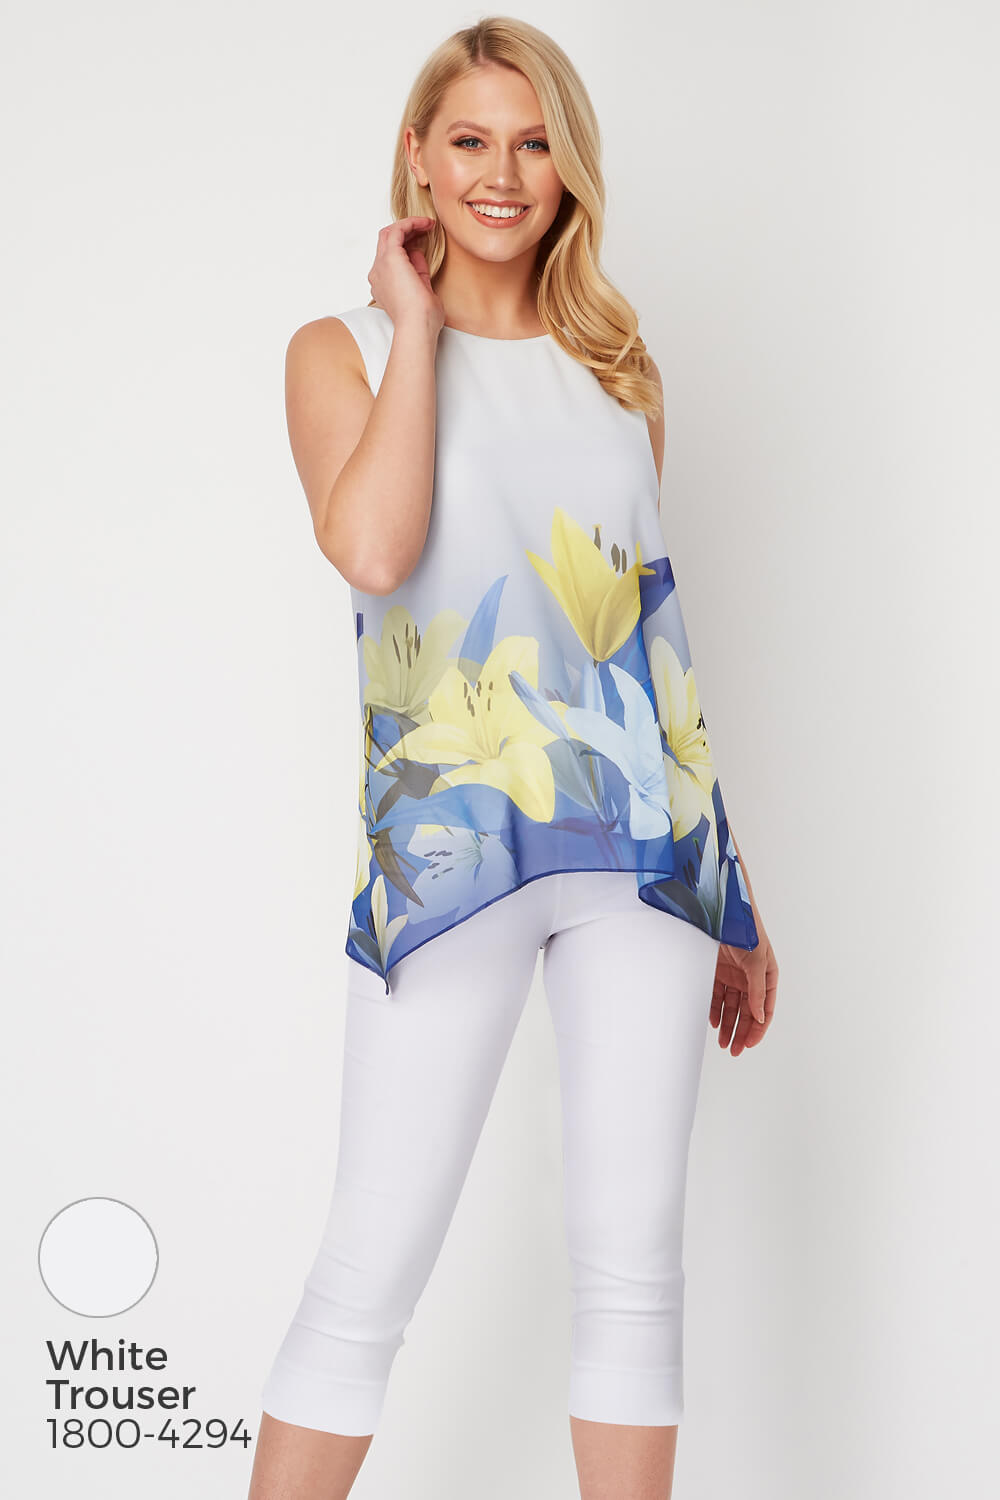 Blue Floral Border Print Overlay Top, Image 5 of 8